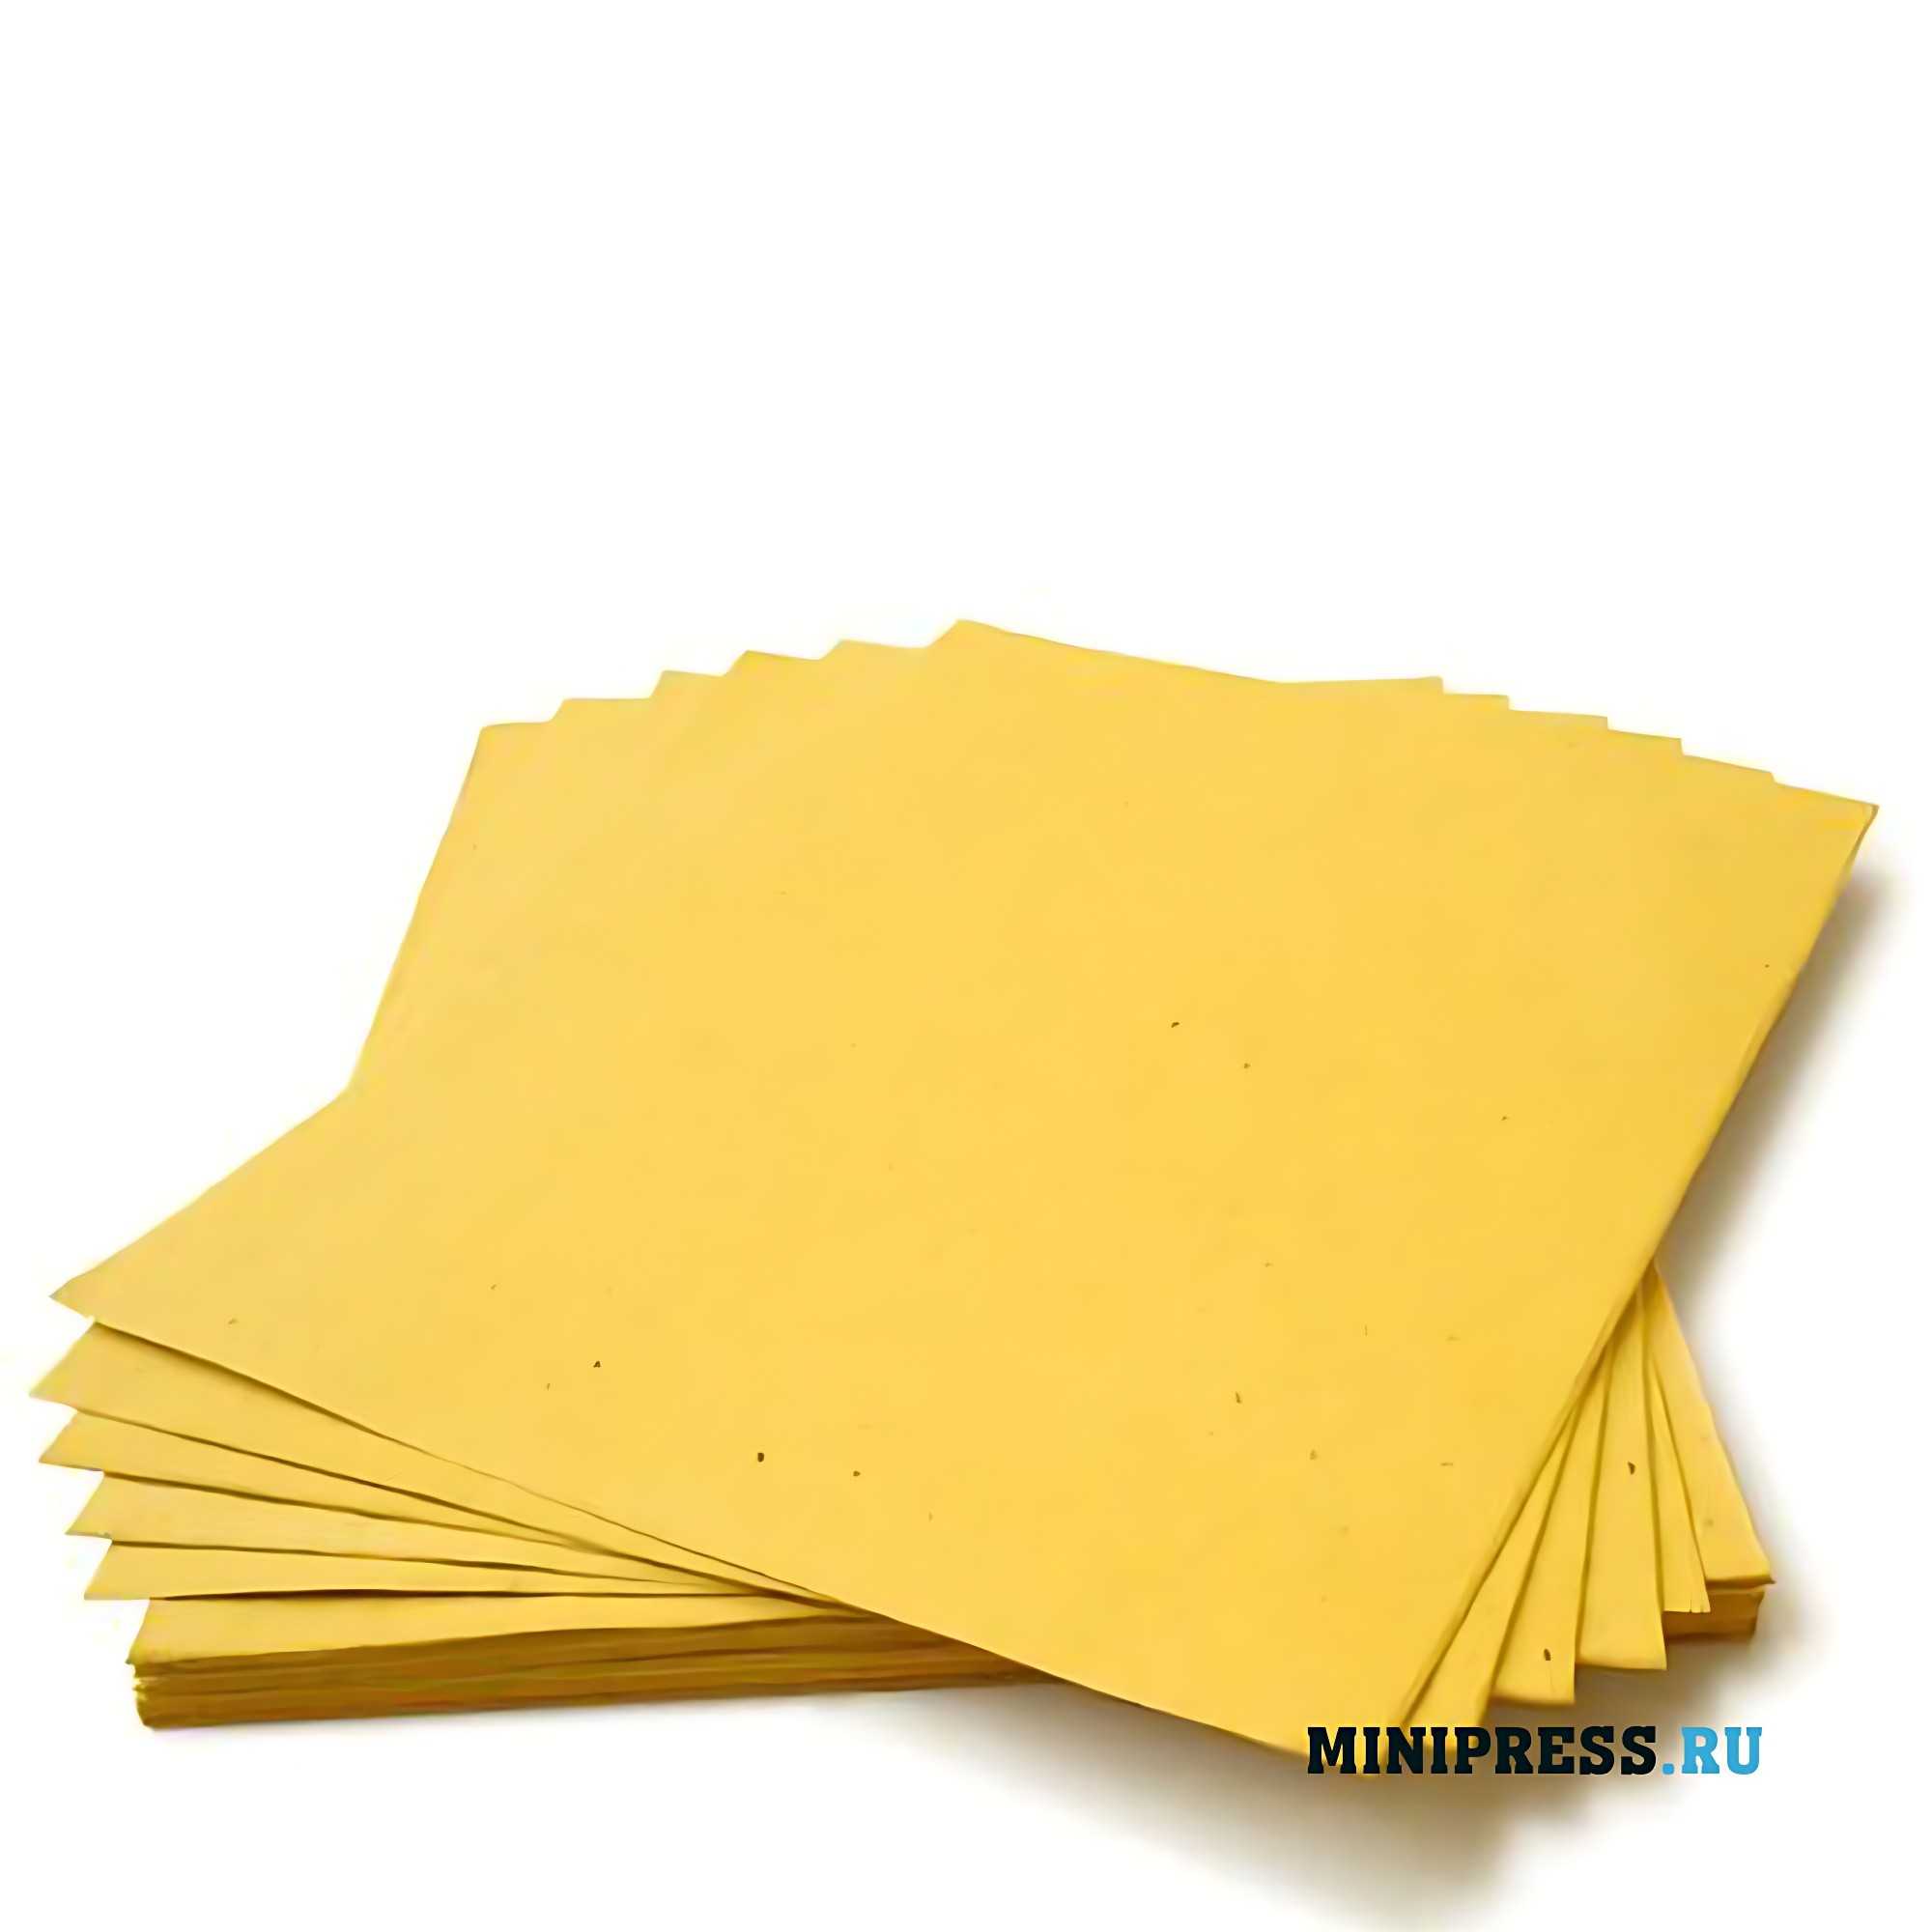 Production of mustard plasters